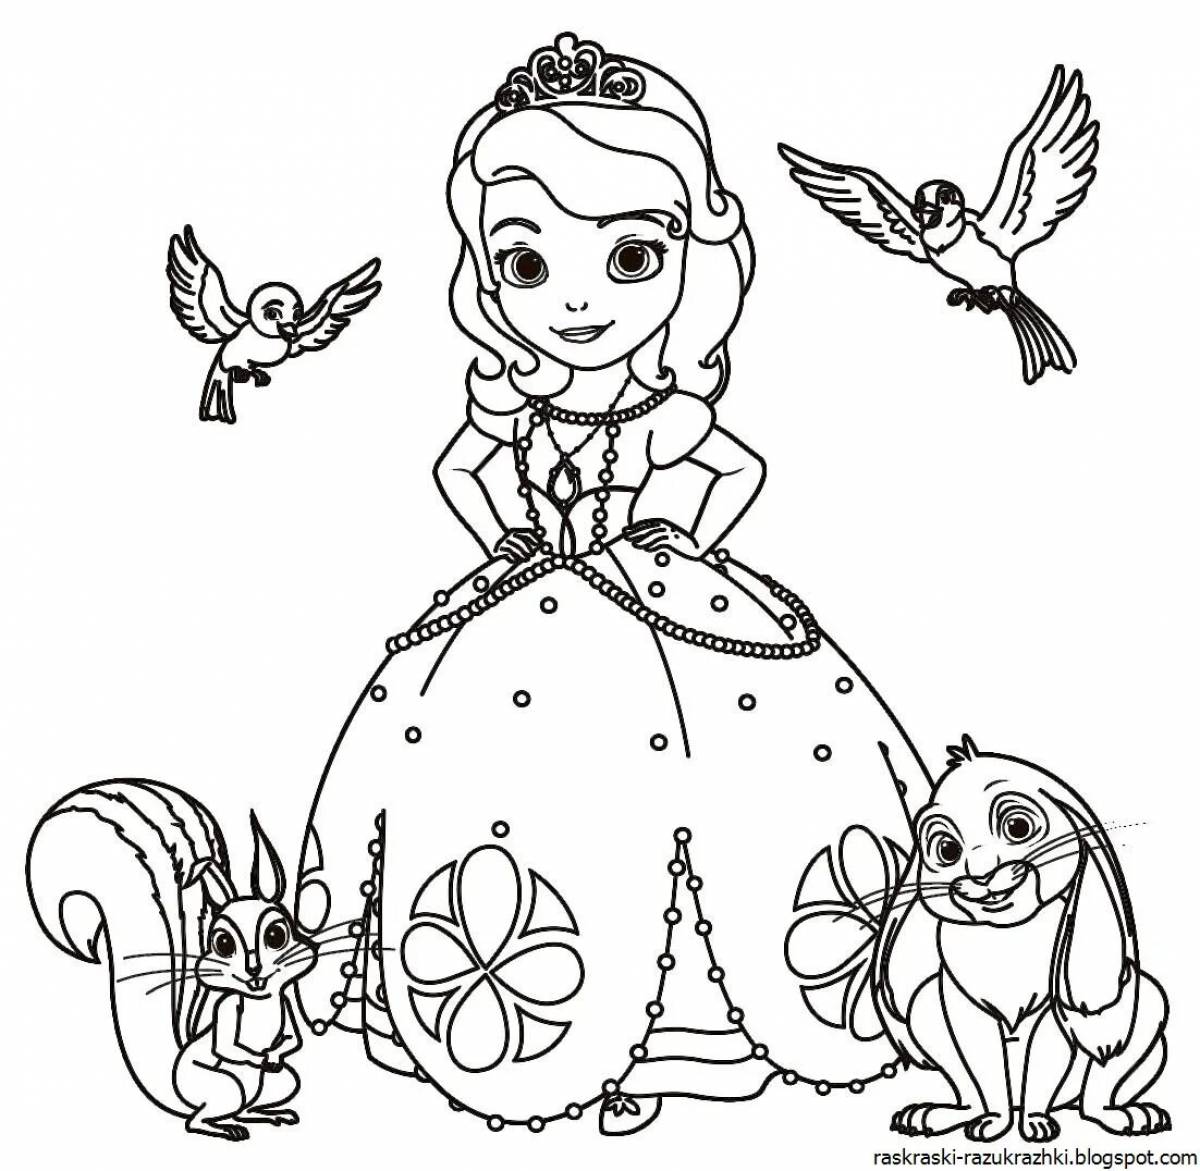 Dreamy princess coloring pages for girls 4 years old